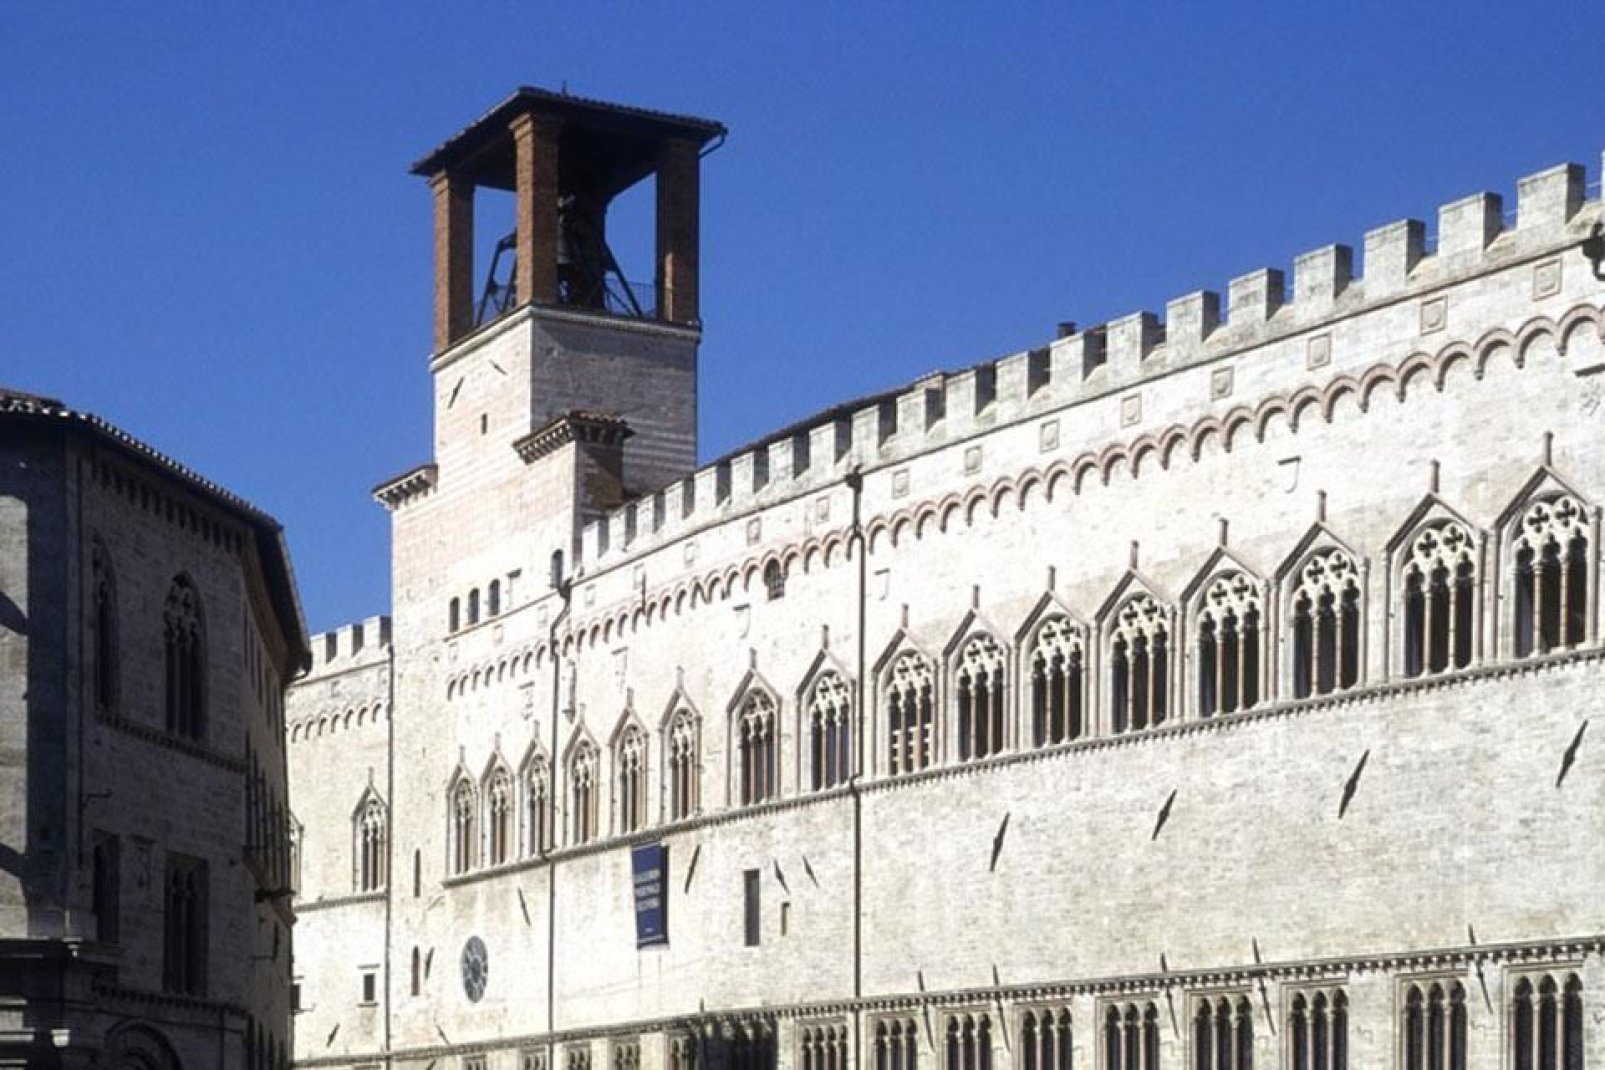 Built in Perugia between 1293 and 1443, the Palazzo dei Priori, which still houses the town hall to this day, is an example of art from the communal period